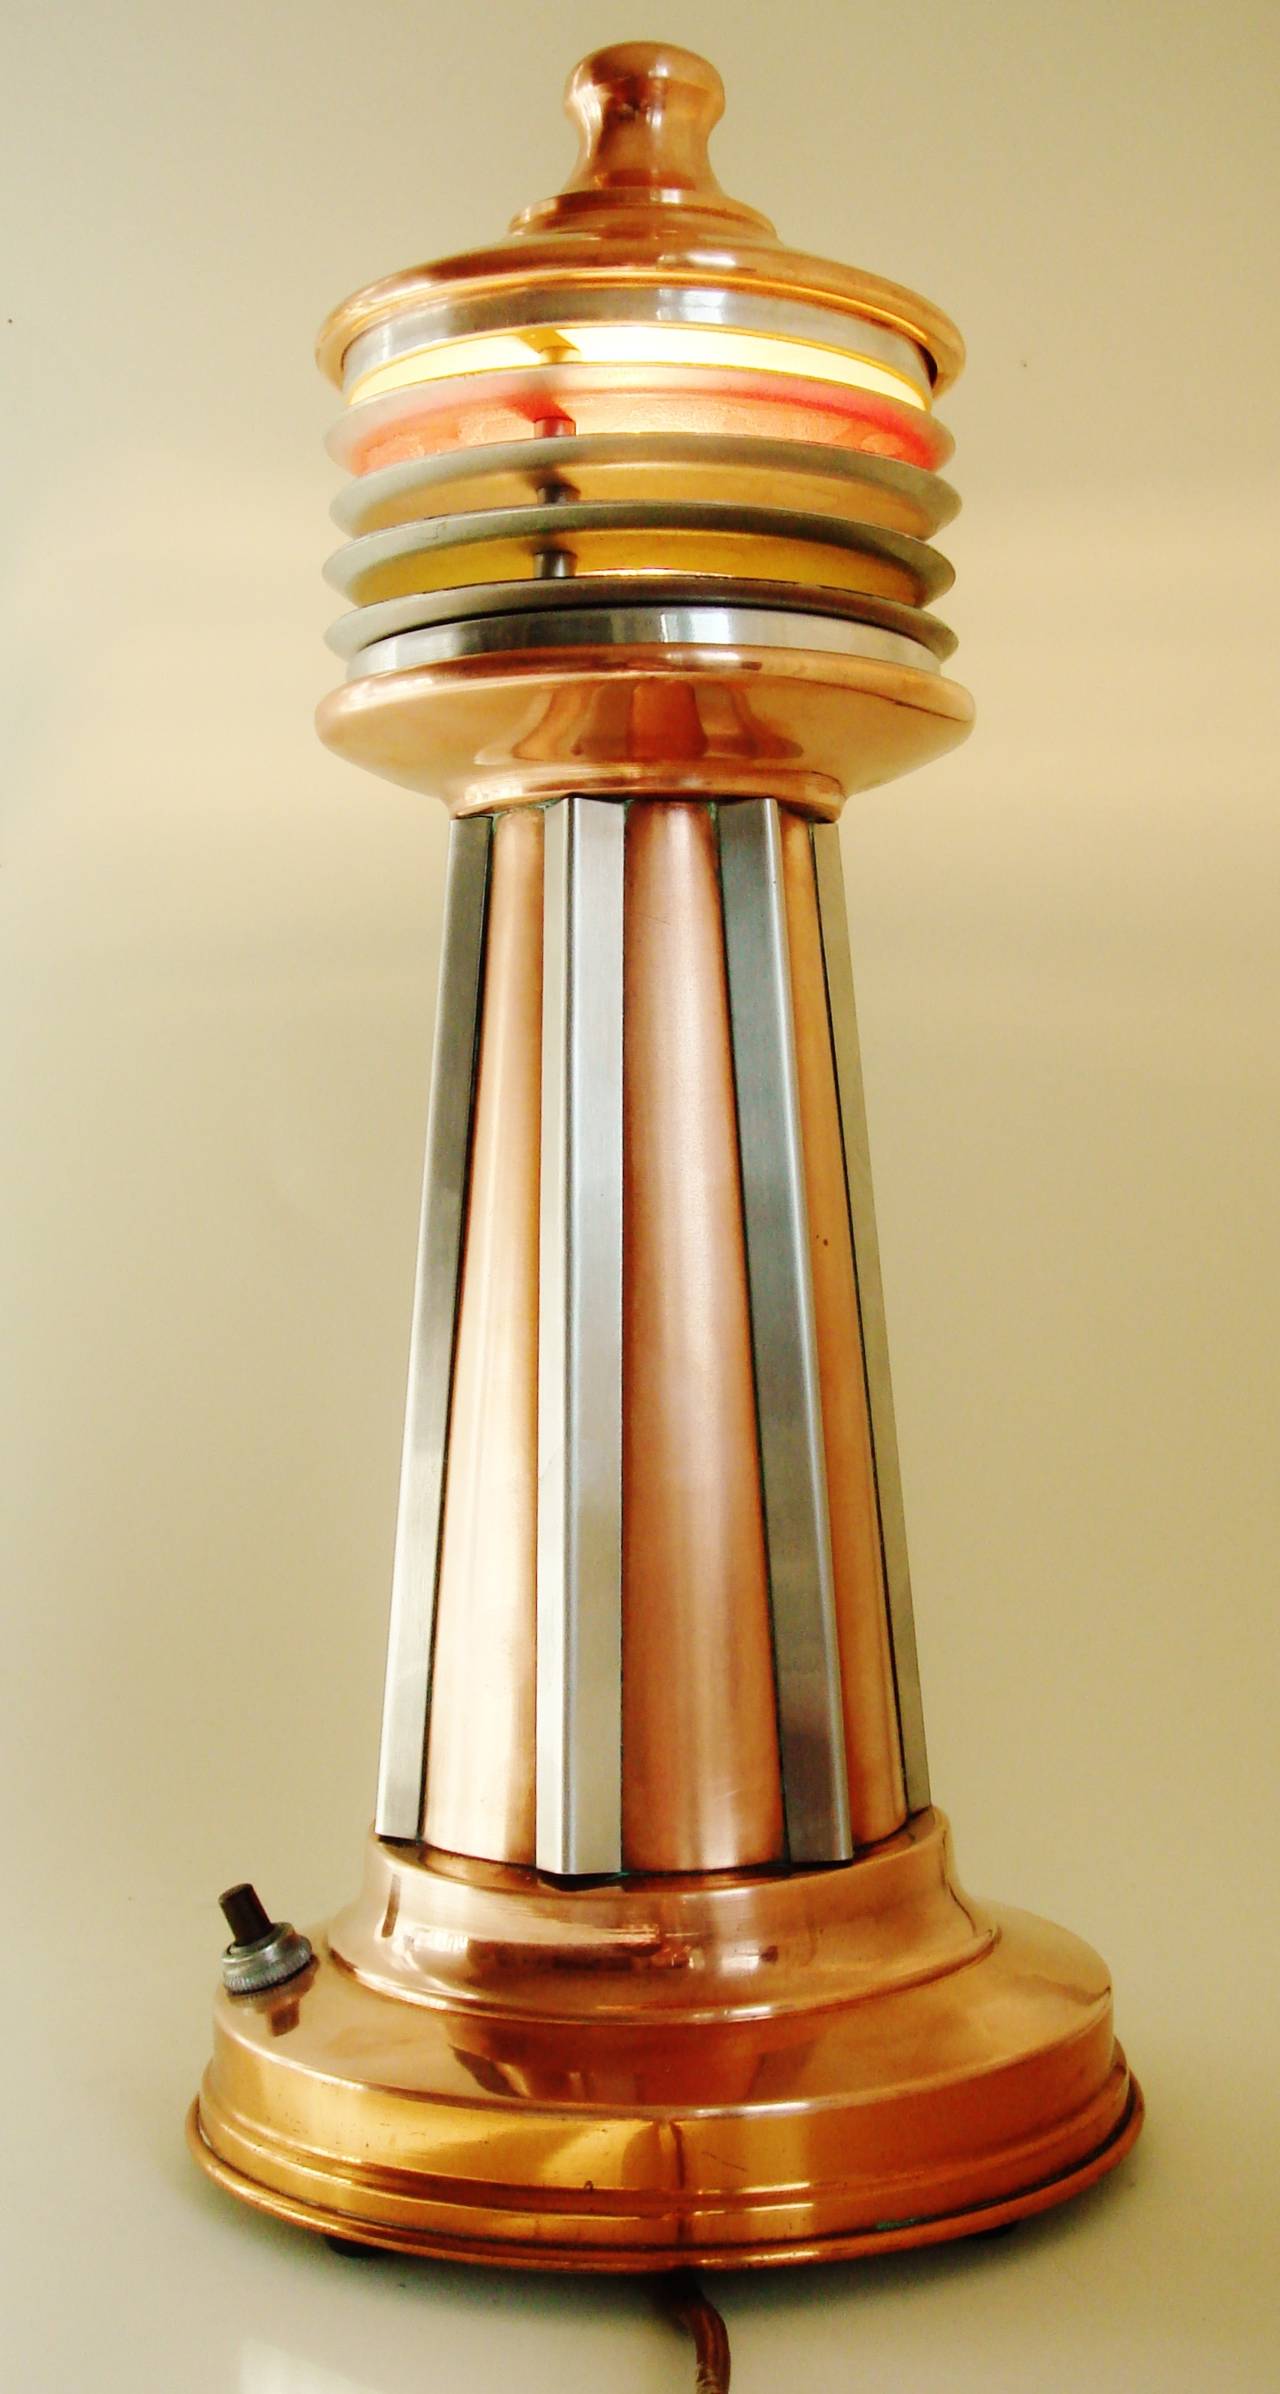 Art Deco or Machine Age Copper and Anodised Aluminium Lighthouse Table Lamp 1